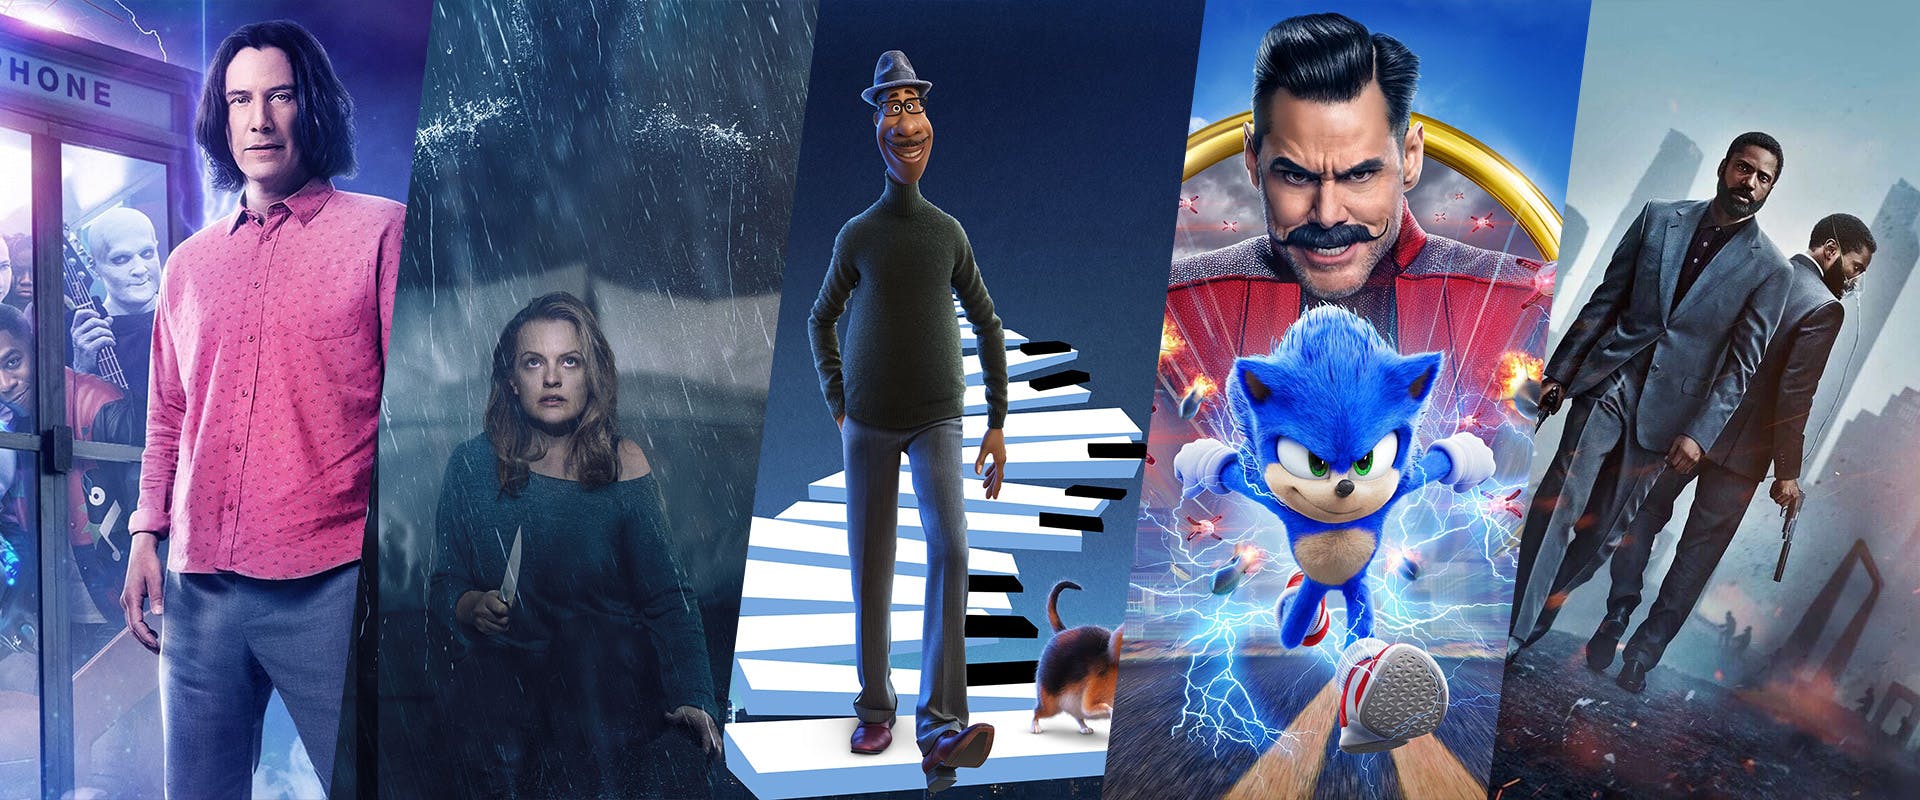 Top 5 Movies of 2020